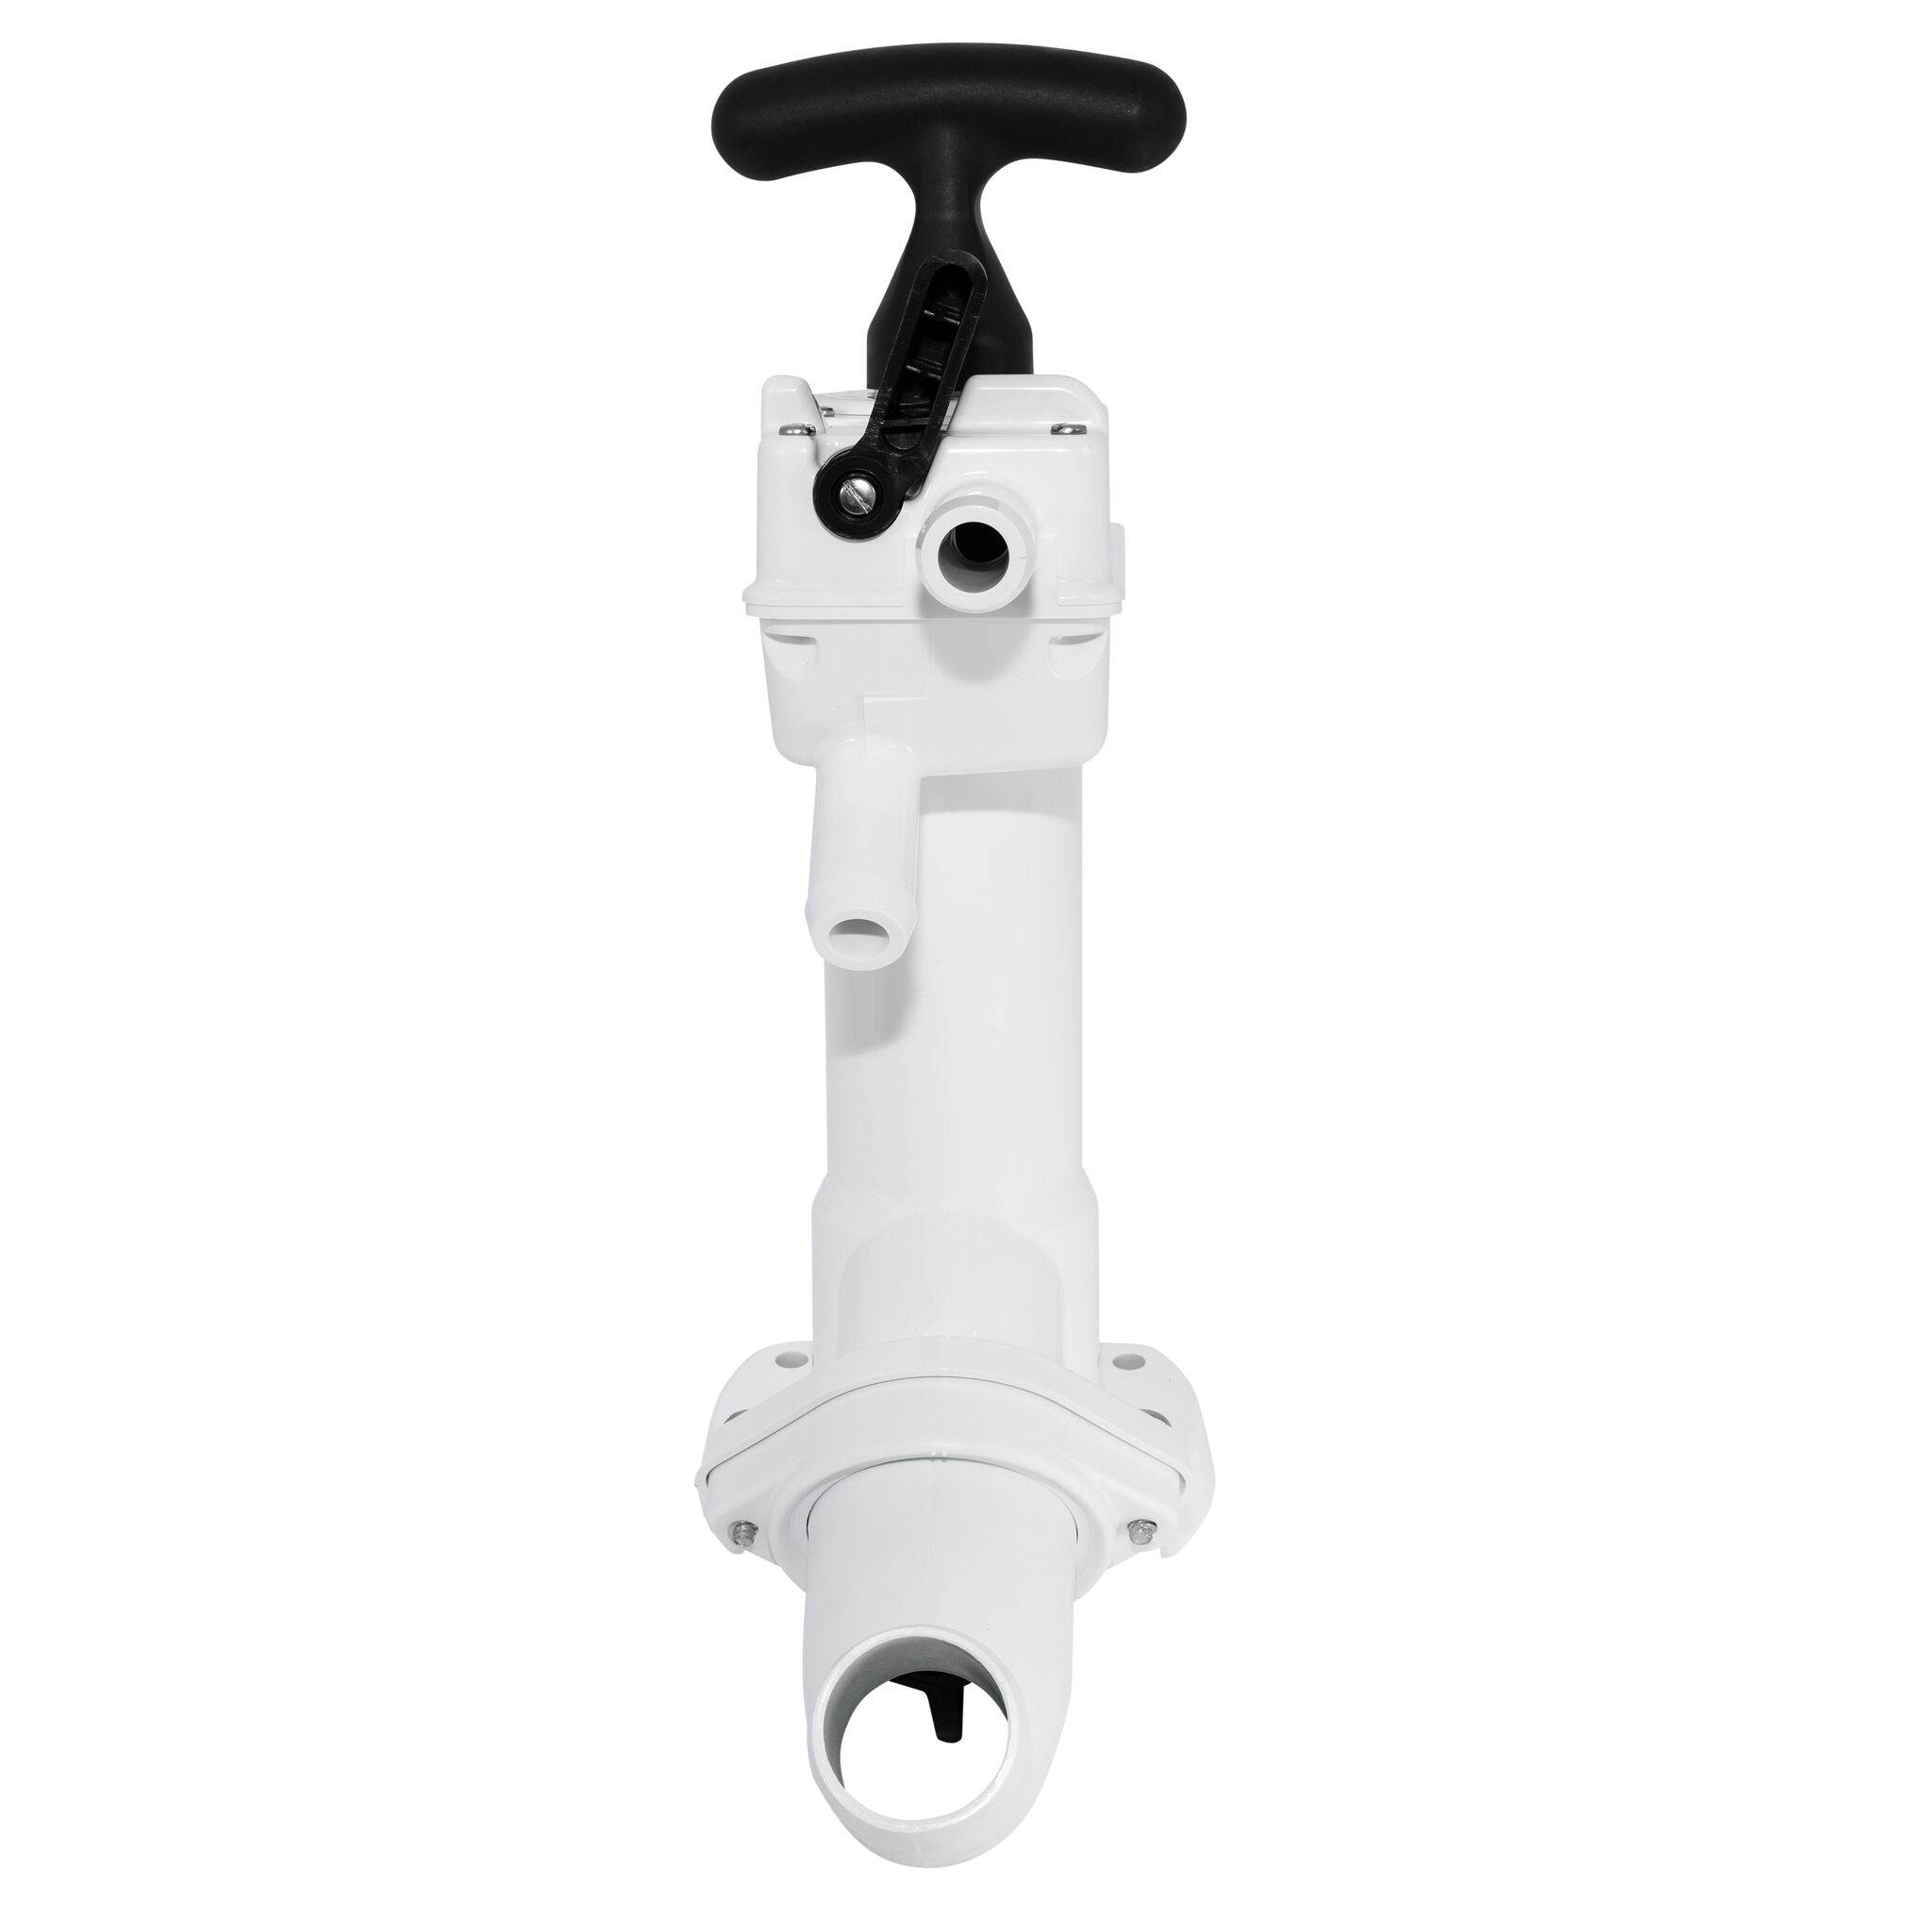 Replacement pump Twist n' Lock for manual on-board toilets